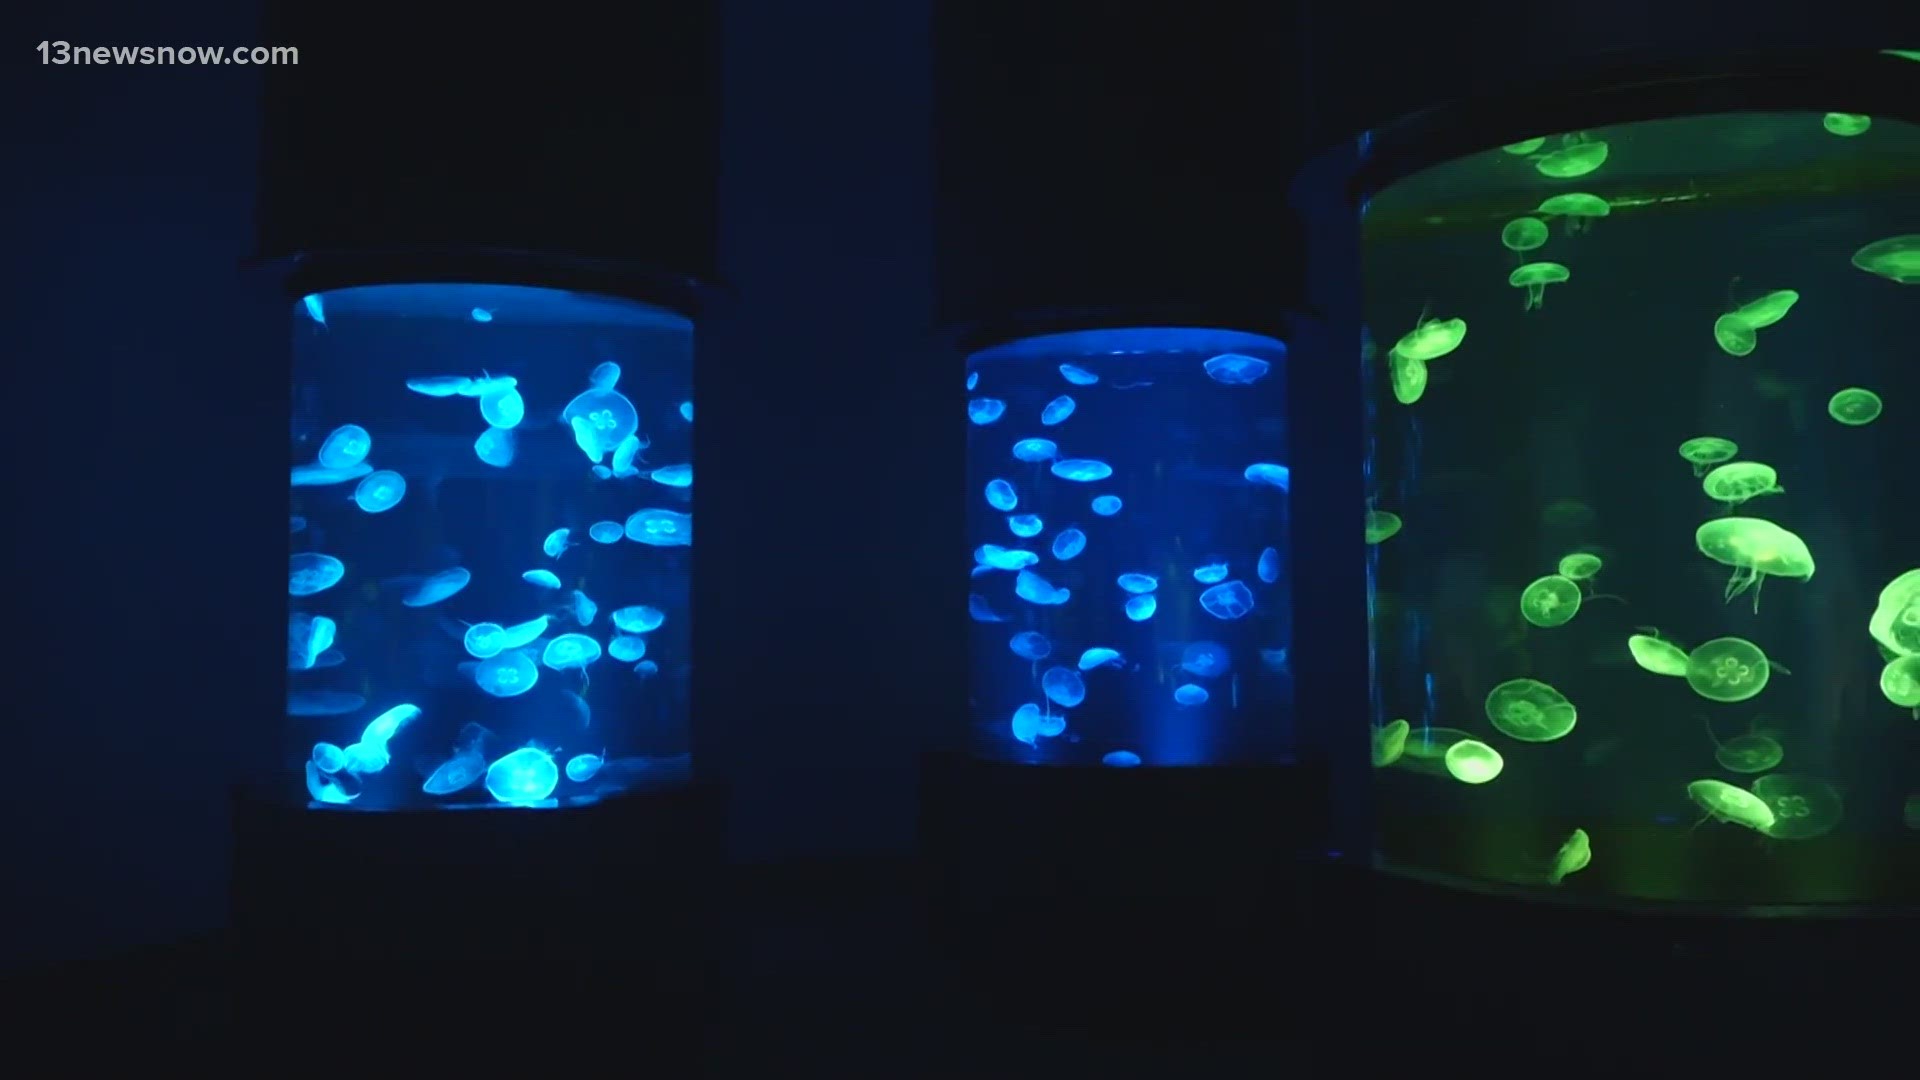 Virginia Aquarium opens its newly-renovated building, featuring a "jellies collection" and interactive watershed, to the public on Sunday.